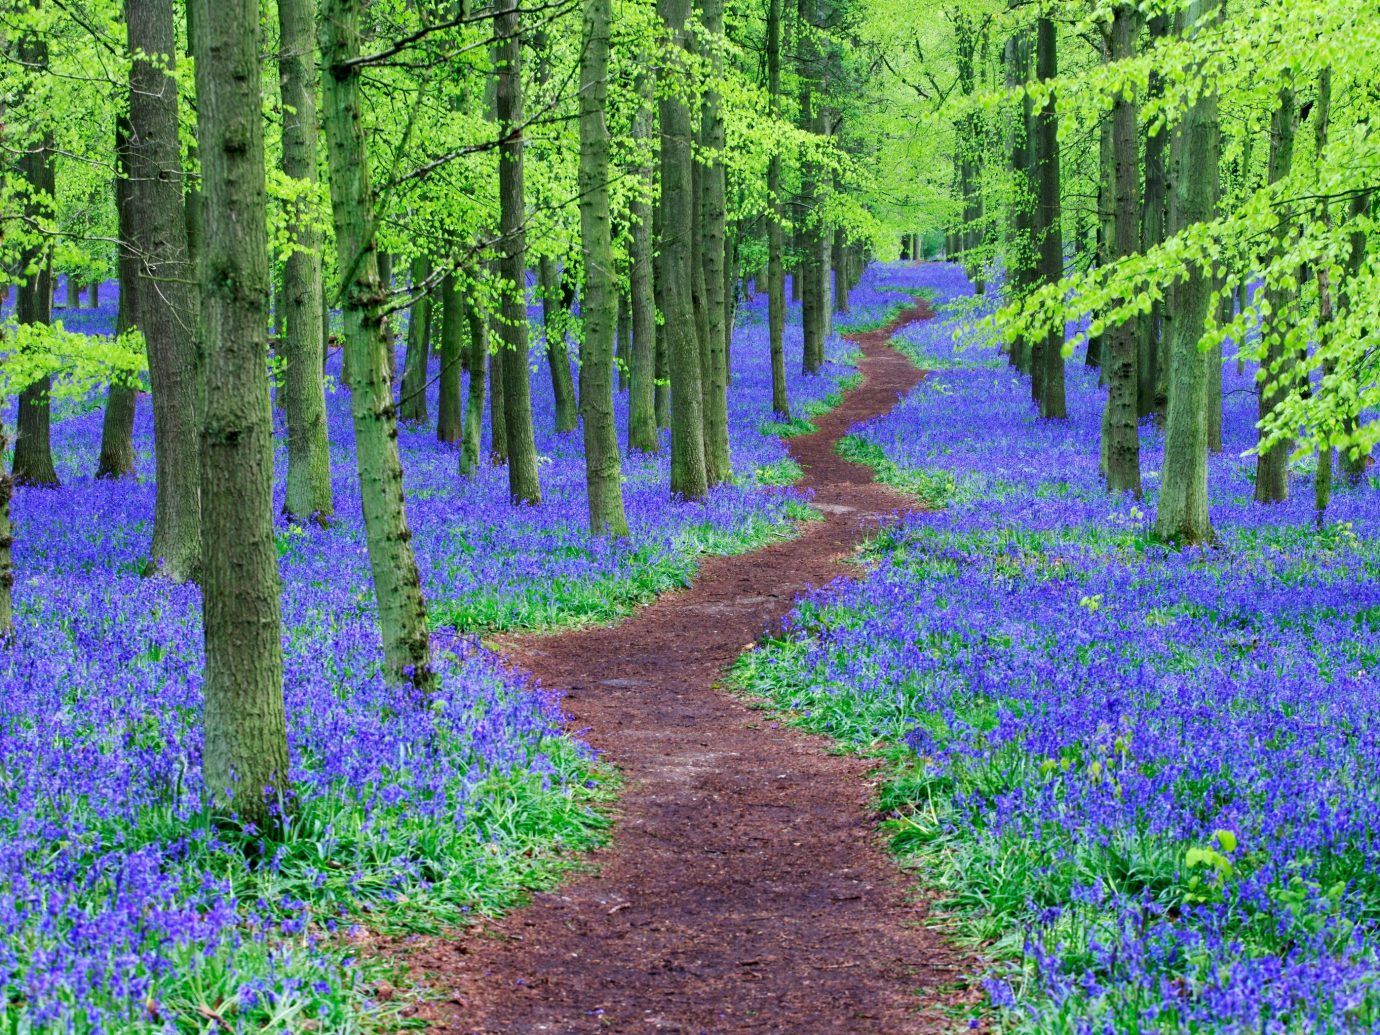 Trip Ideas tree outdoor grass habitat plant Forest woodland flower natural environment ecosystem land plant path biome woody plant wood meadow flowering plant lupin wildflower temperate coniferous forest wooded shrub area surrounded lush